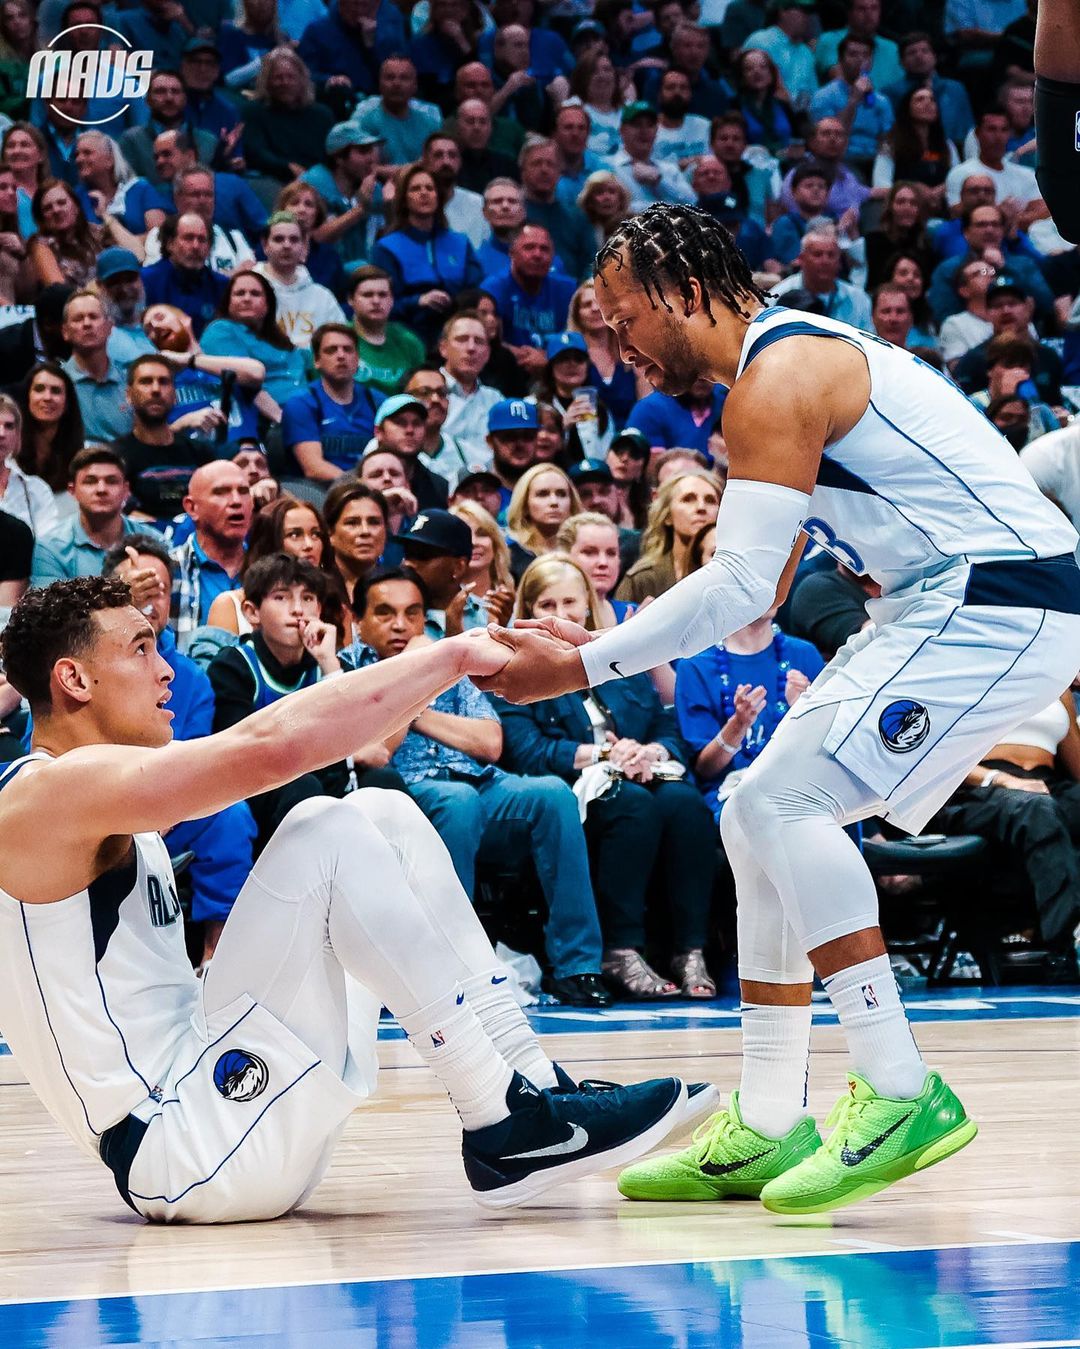 Sometimes we all need that midweek pick-me-up  #MFFL...